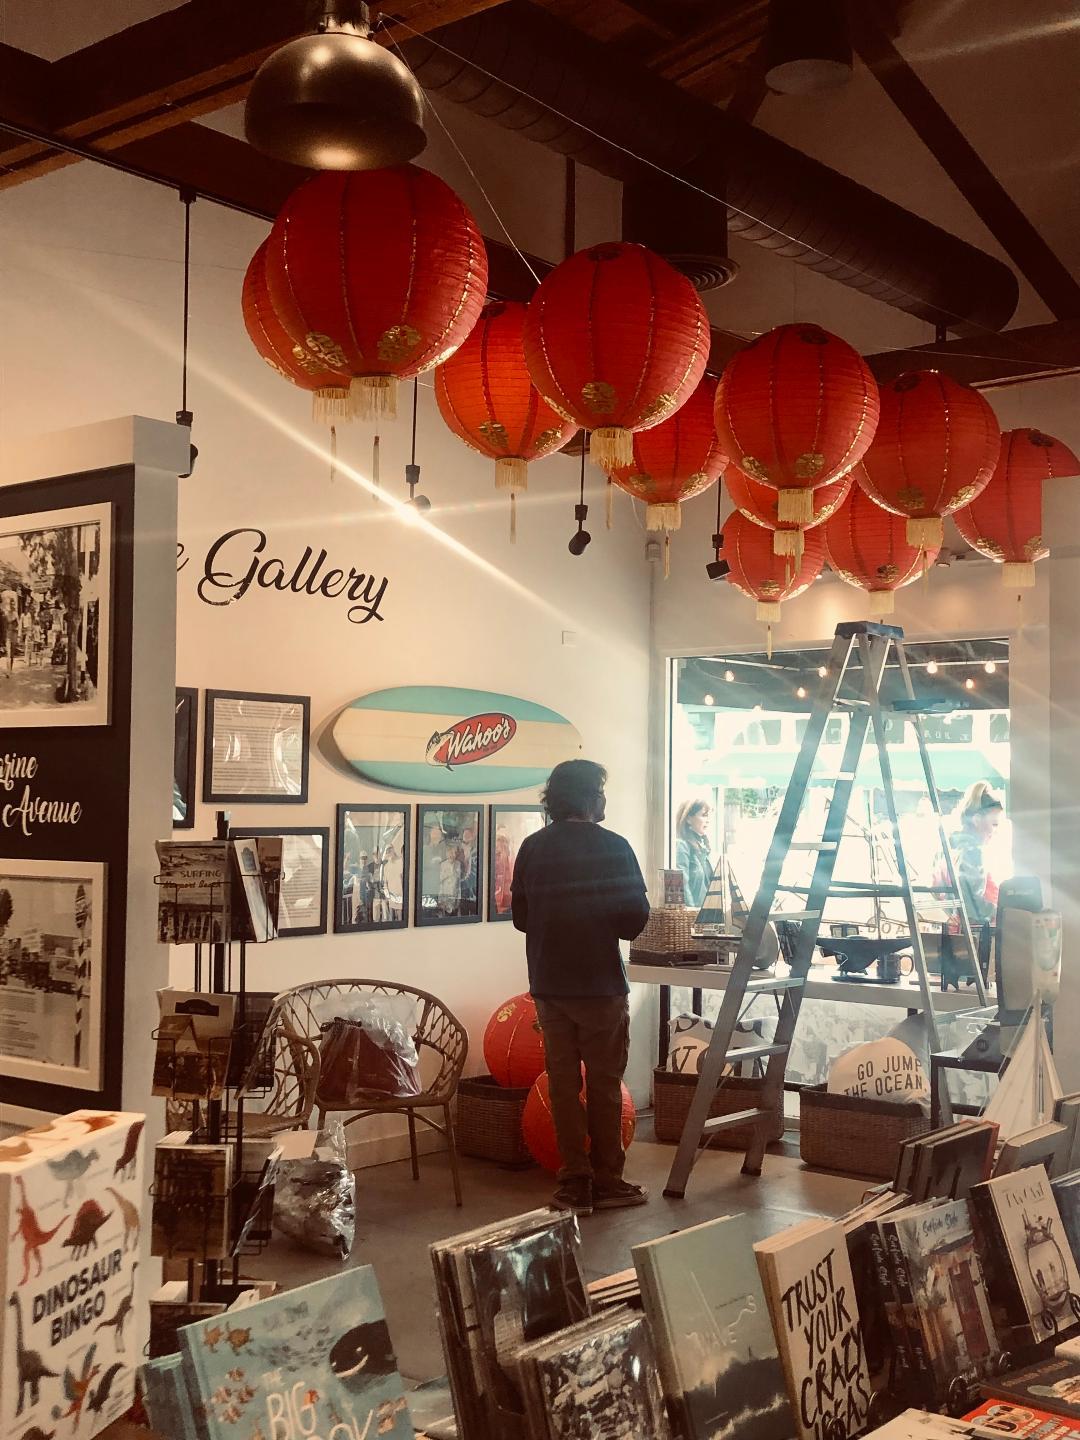 Preparations for an exhibit commemorating the Lunar New Year are underway at the Balboa Island Museum & Historical Society. (Lynn Hackman/The Epoch Times)